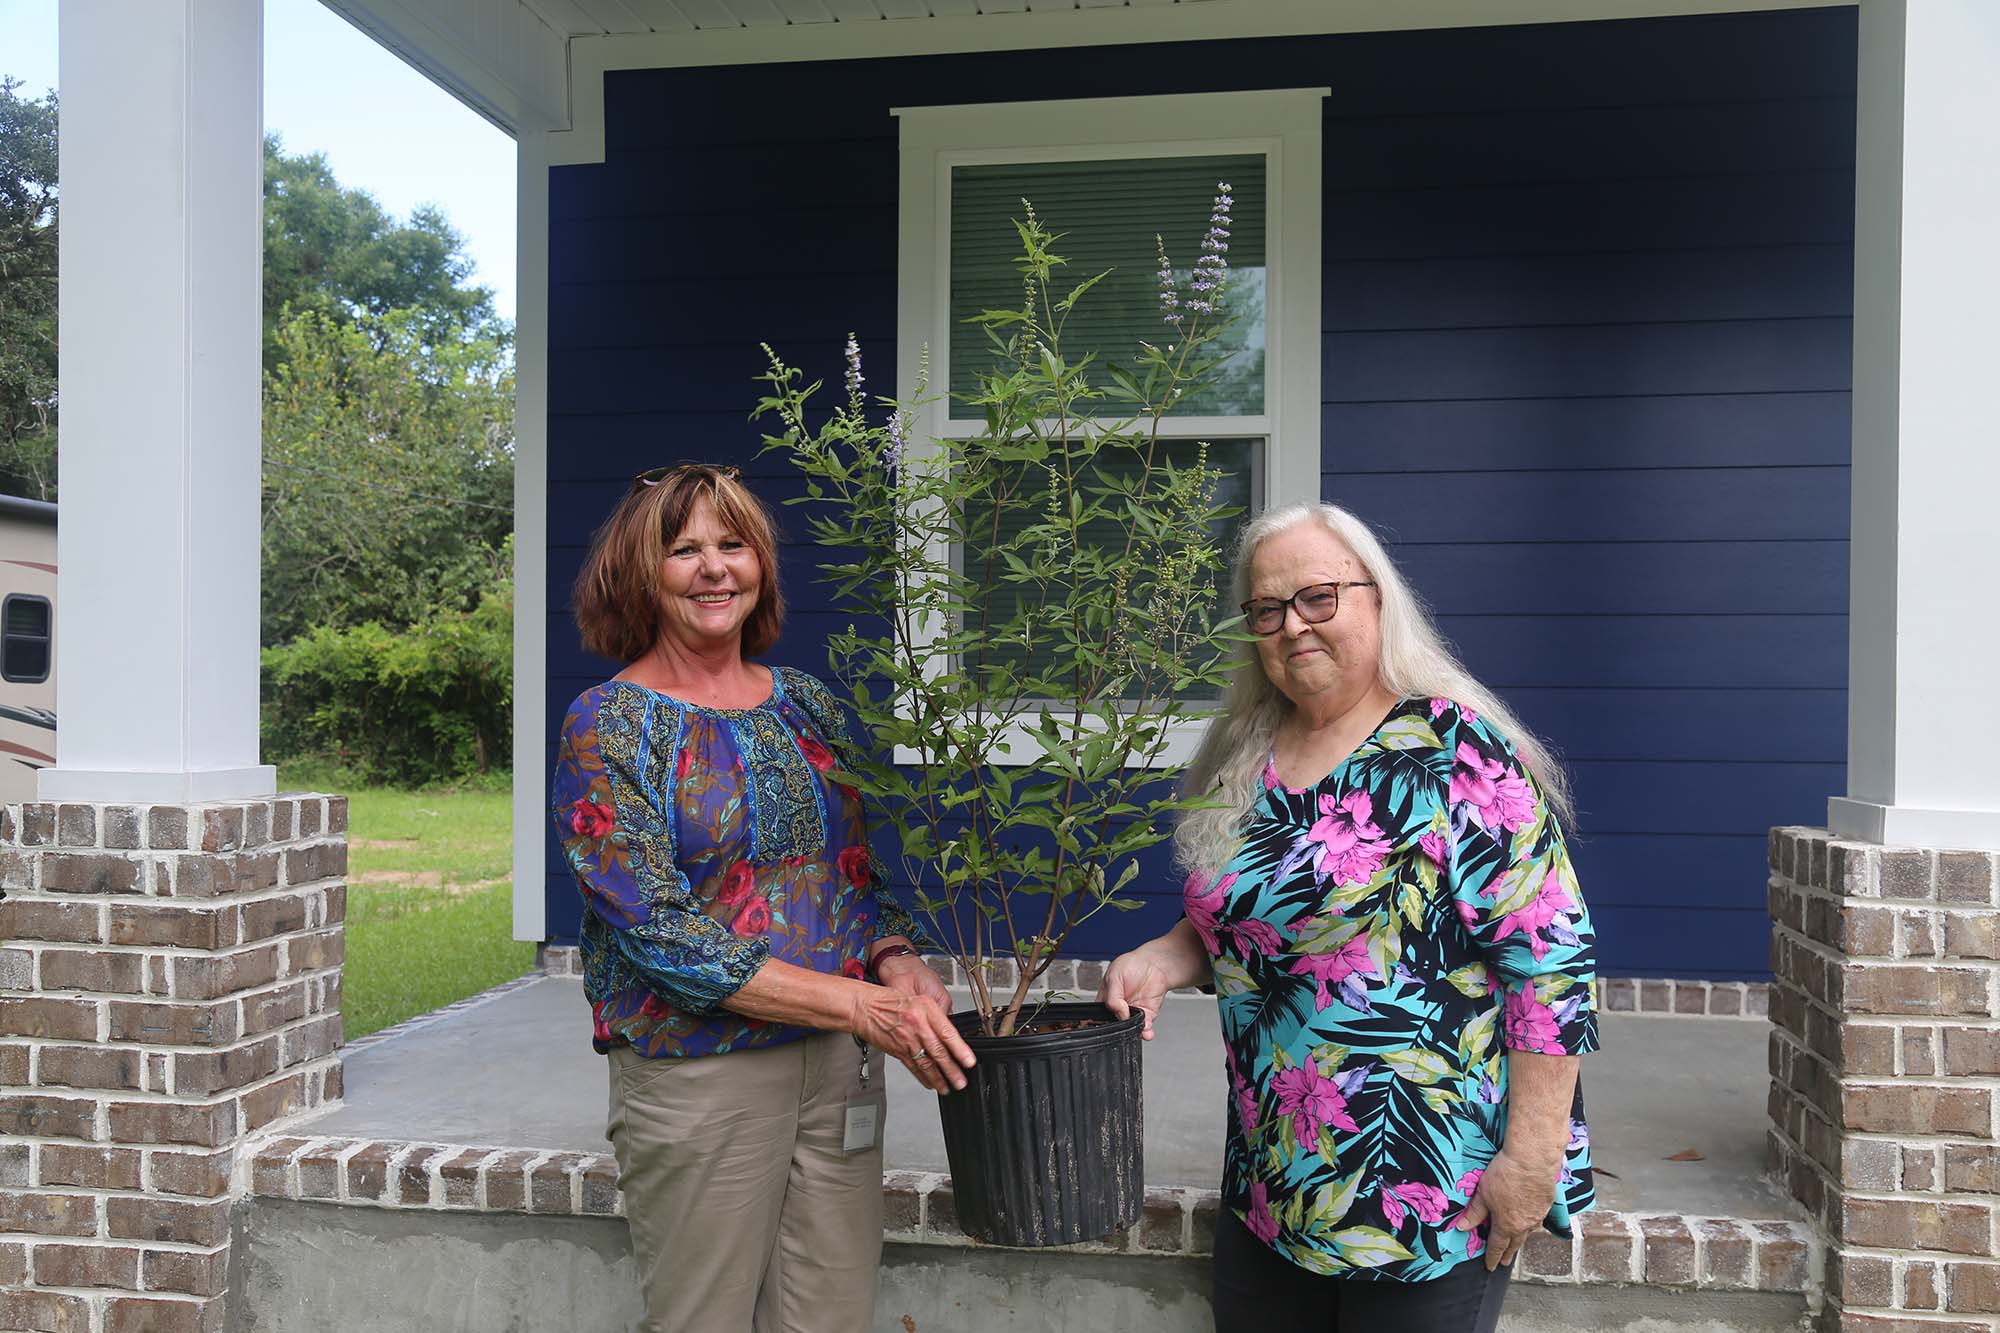 County Arborist Jimmie Jarrett gives Emma Coker a plant for her new home